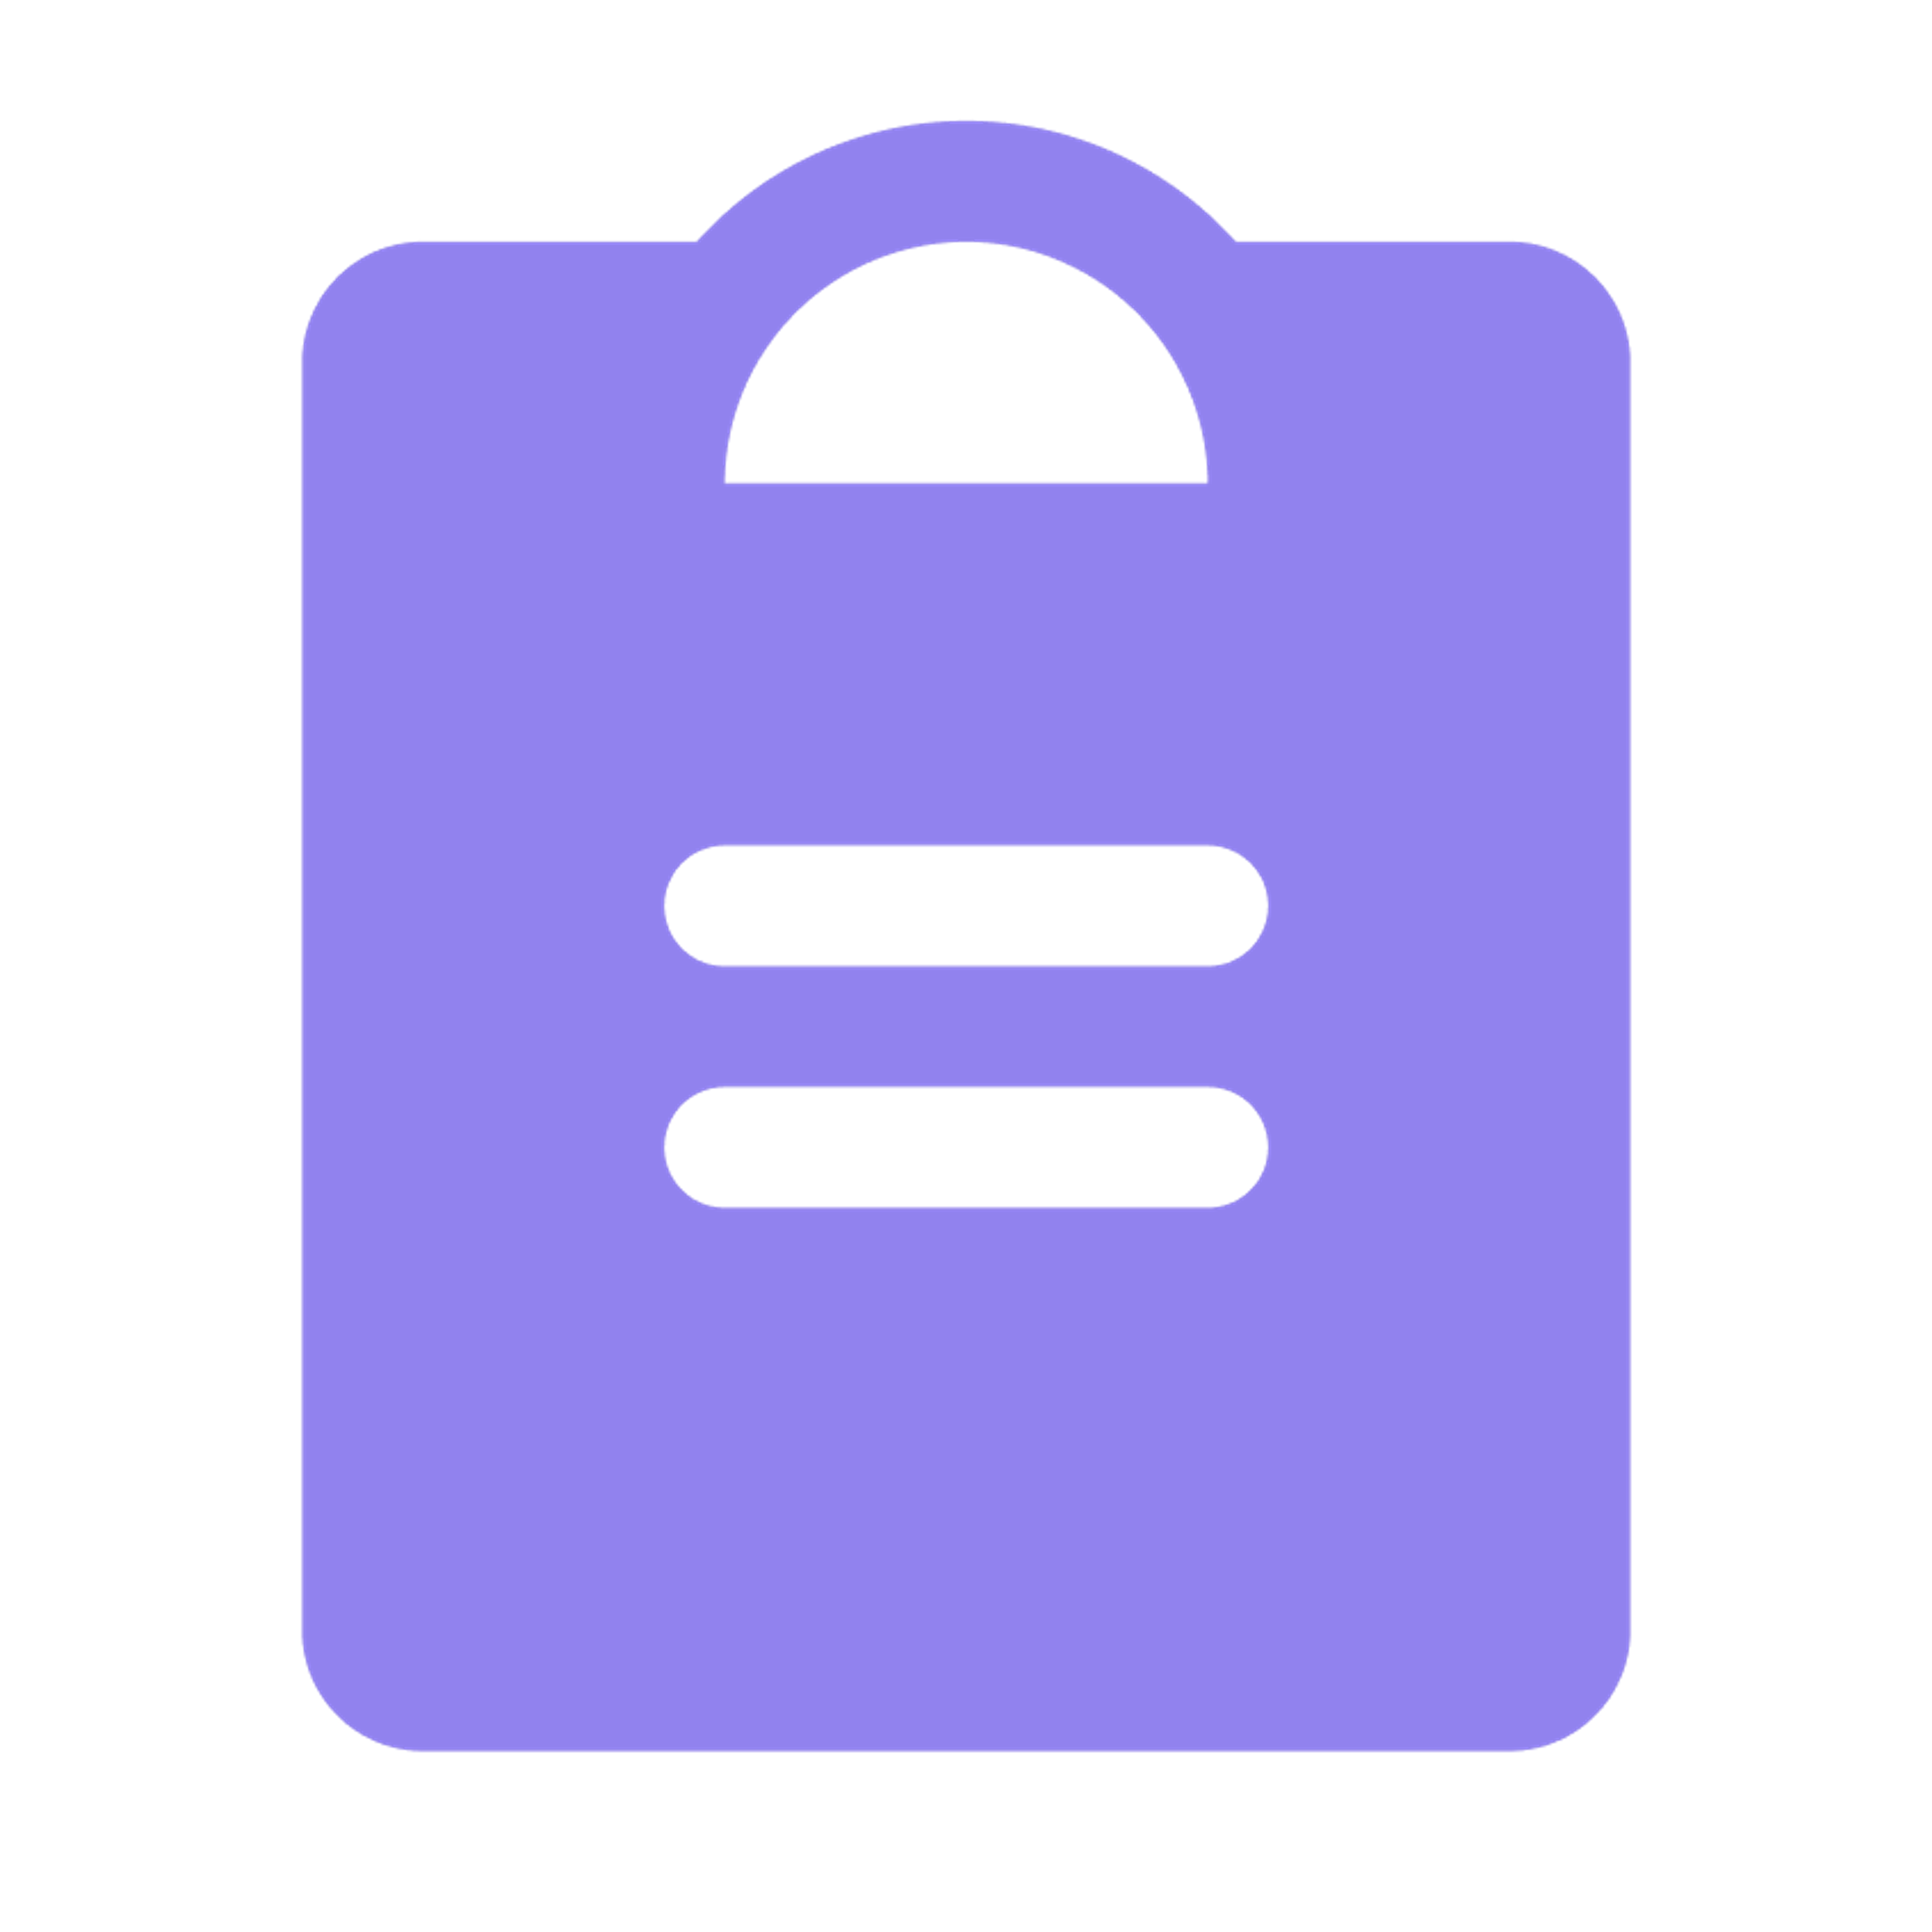 A purple icon of a clipboard on a transparent background